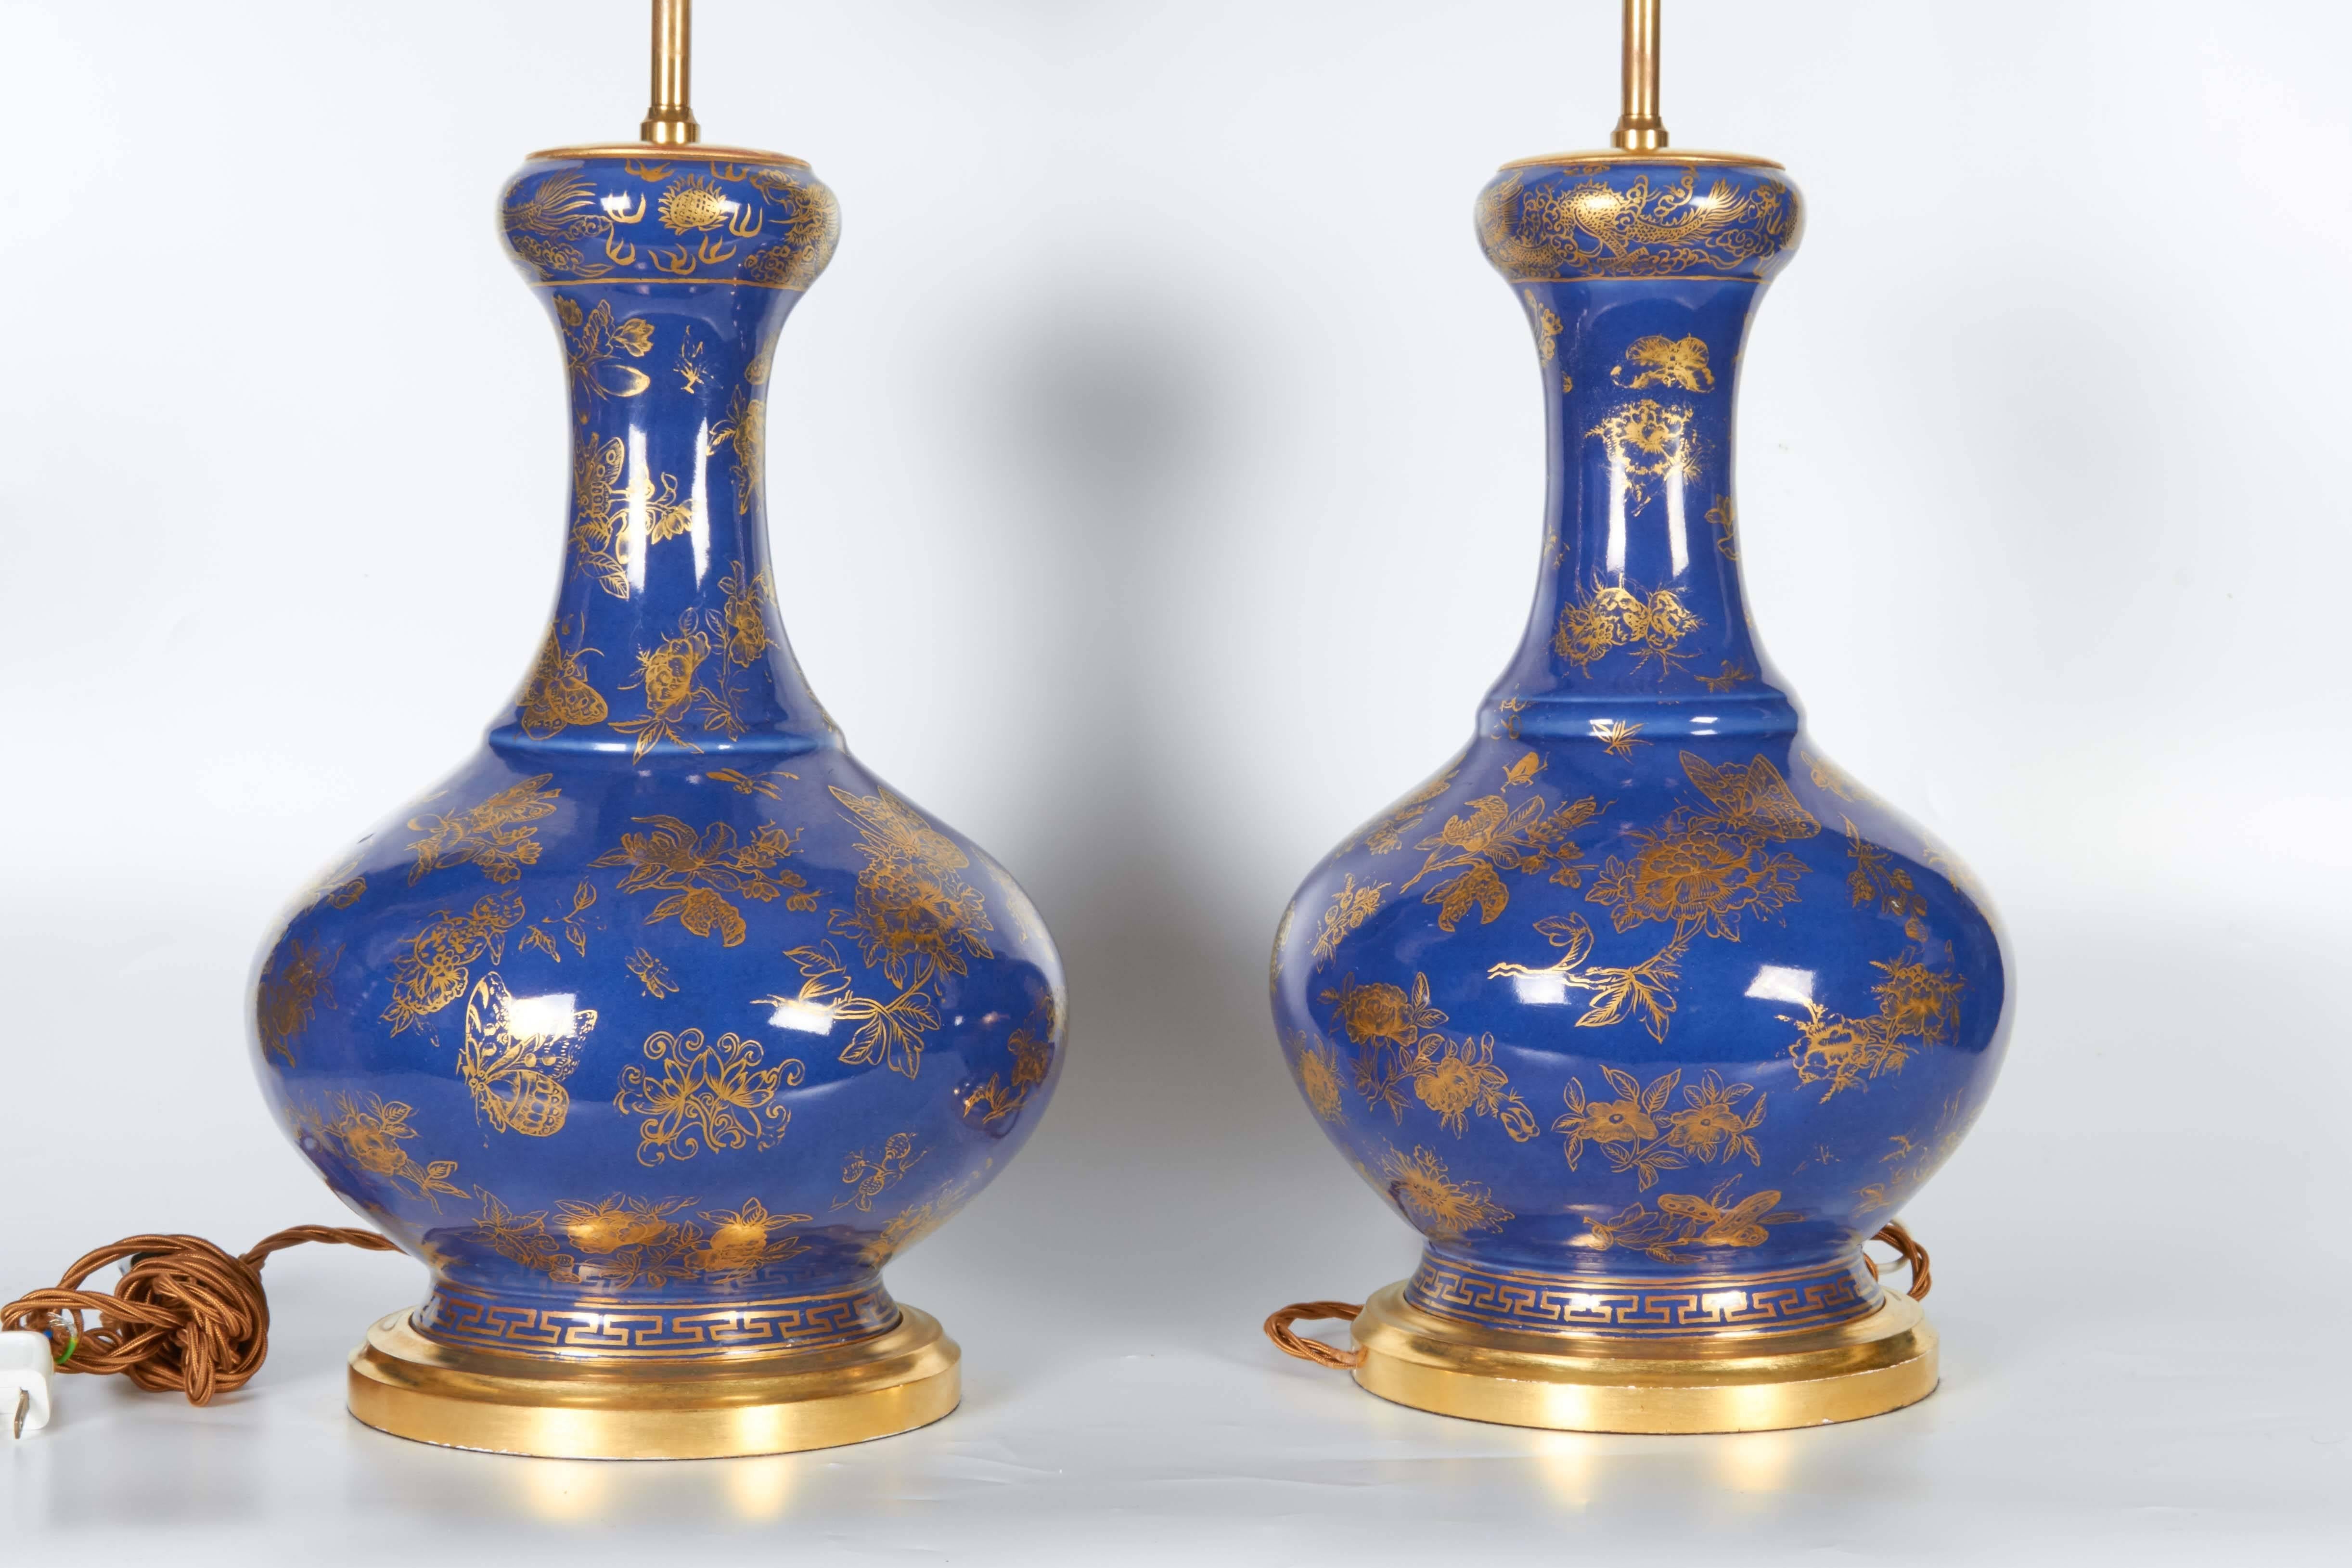 Mid-19th Century Pair of Chinese Blue Poudre Porcelain and Gilt Decorated Lamps